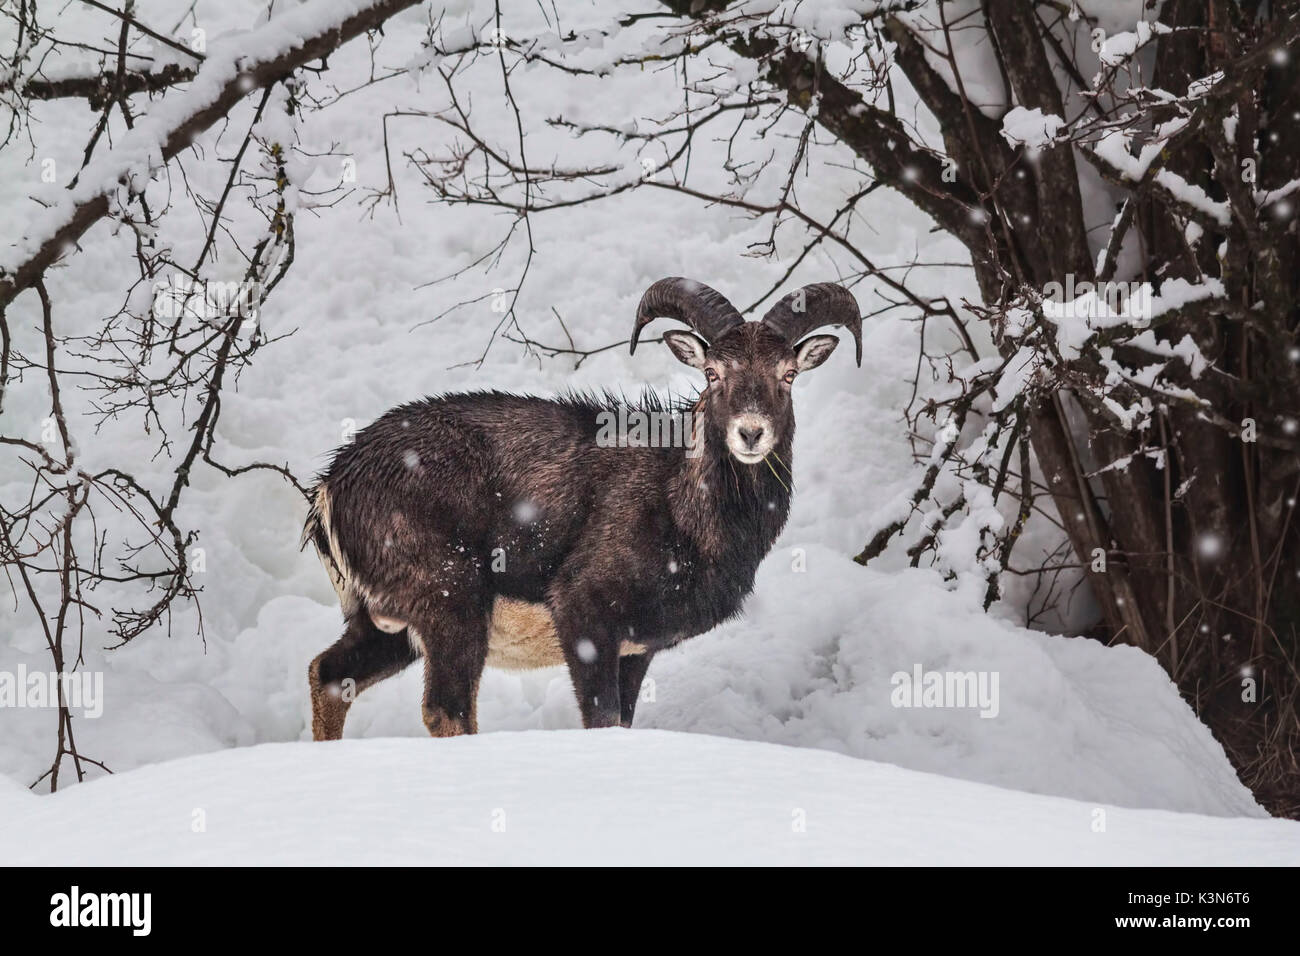 Young male mouflon taken during a snowfall in its natural environment in the Dolomites. Stock Photo